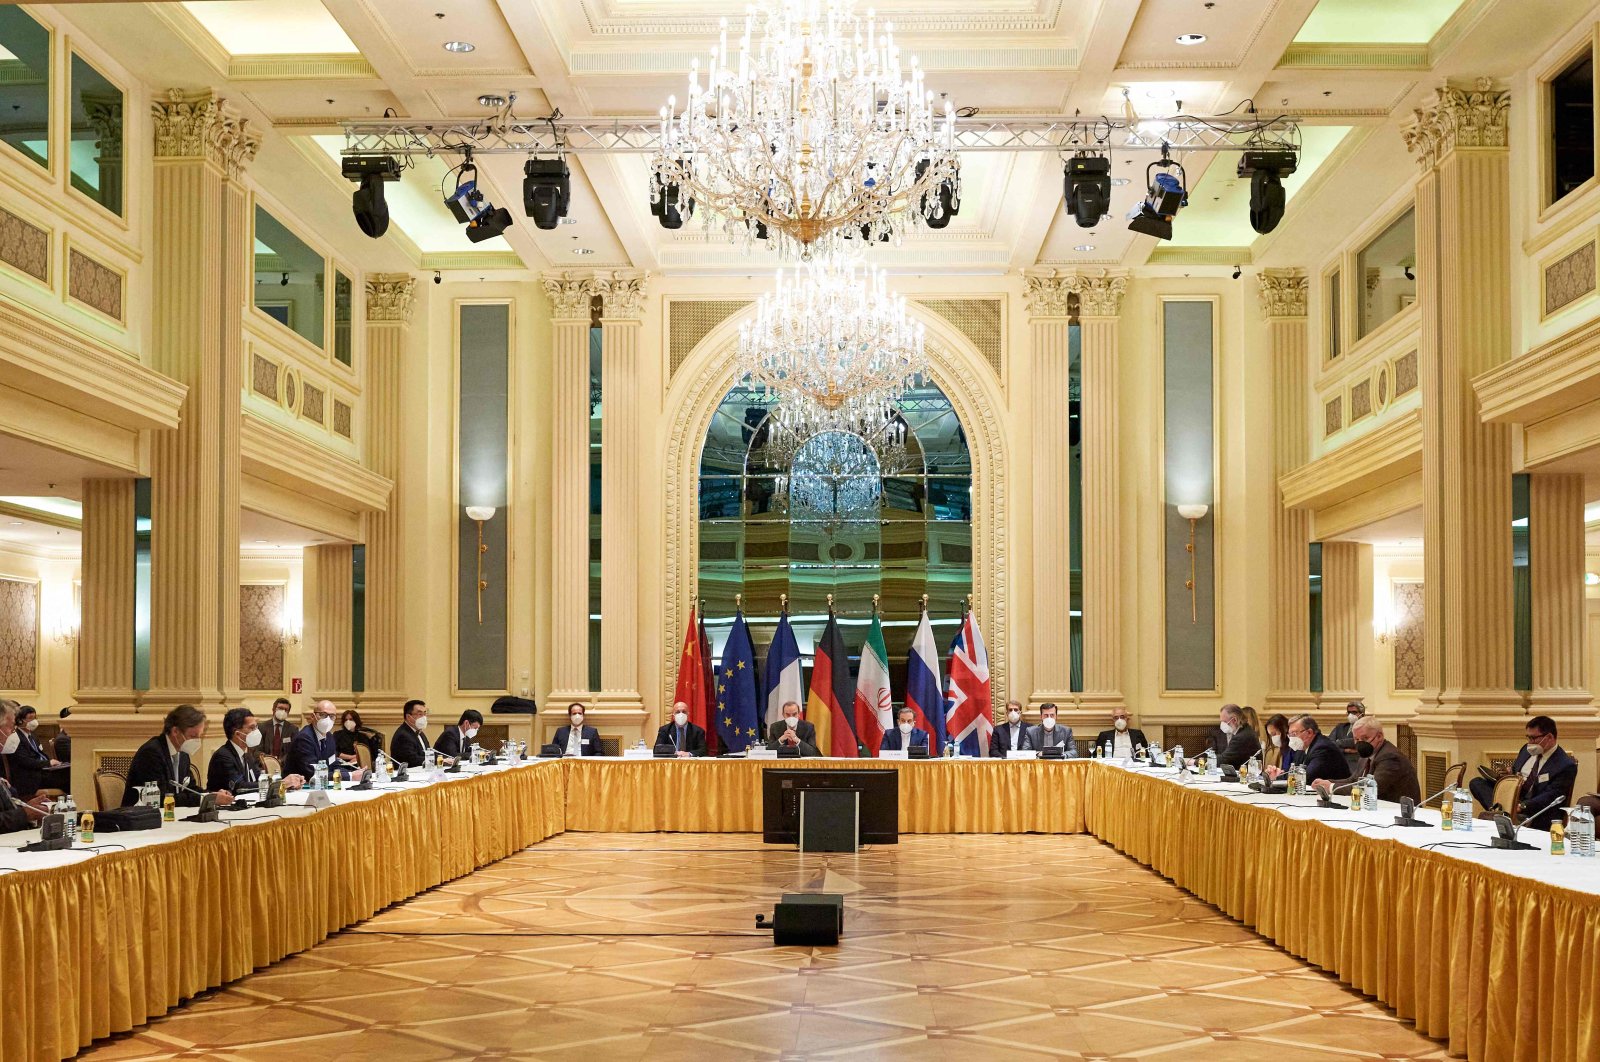 Diplomats from the EU, China, Russia and Iran at the start of talks at the Grand Hotel in Vienna, Austria, April 6, 2021. (Vienna EU Delegation Photo via AFP)